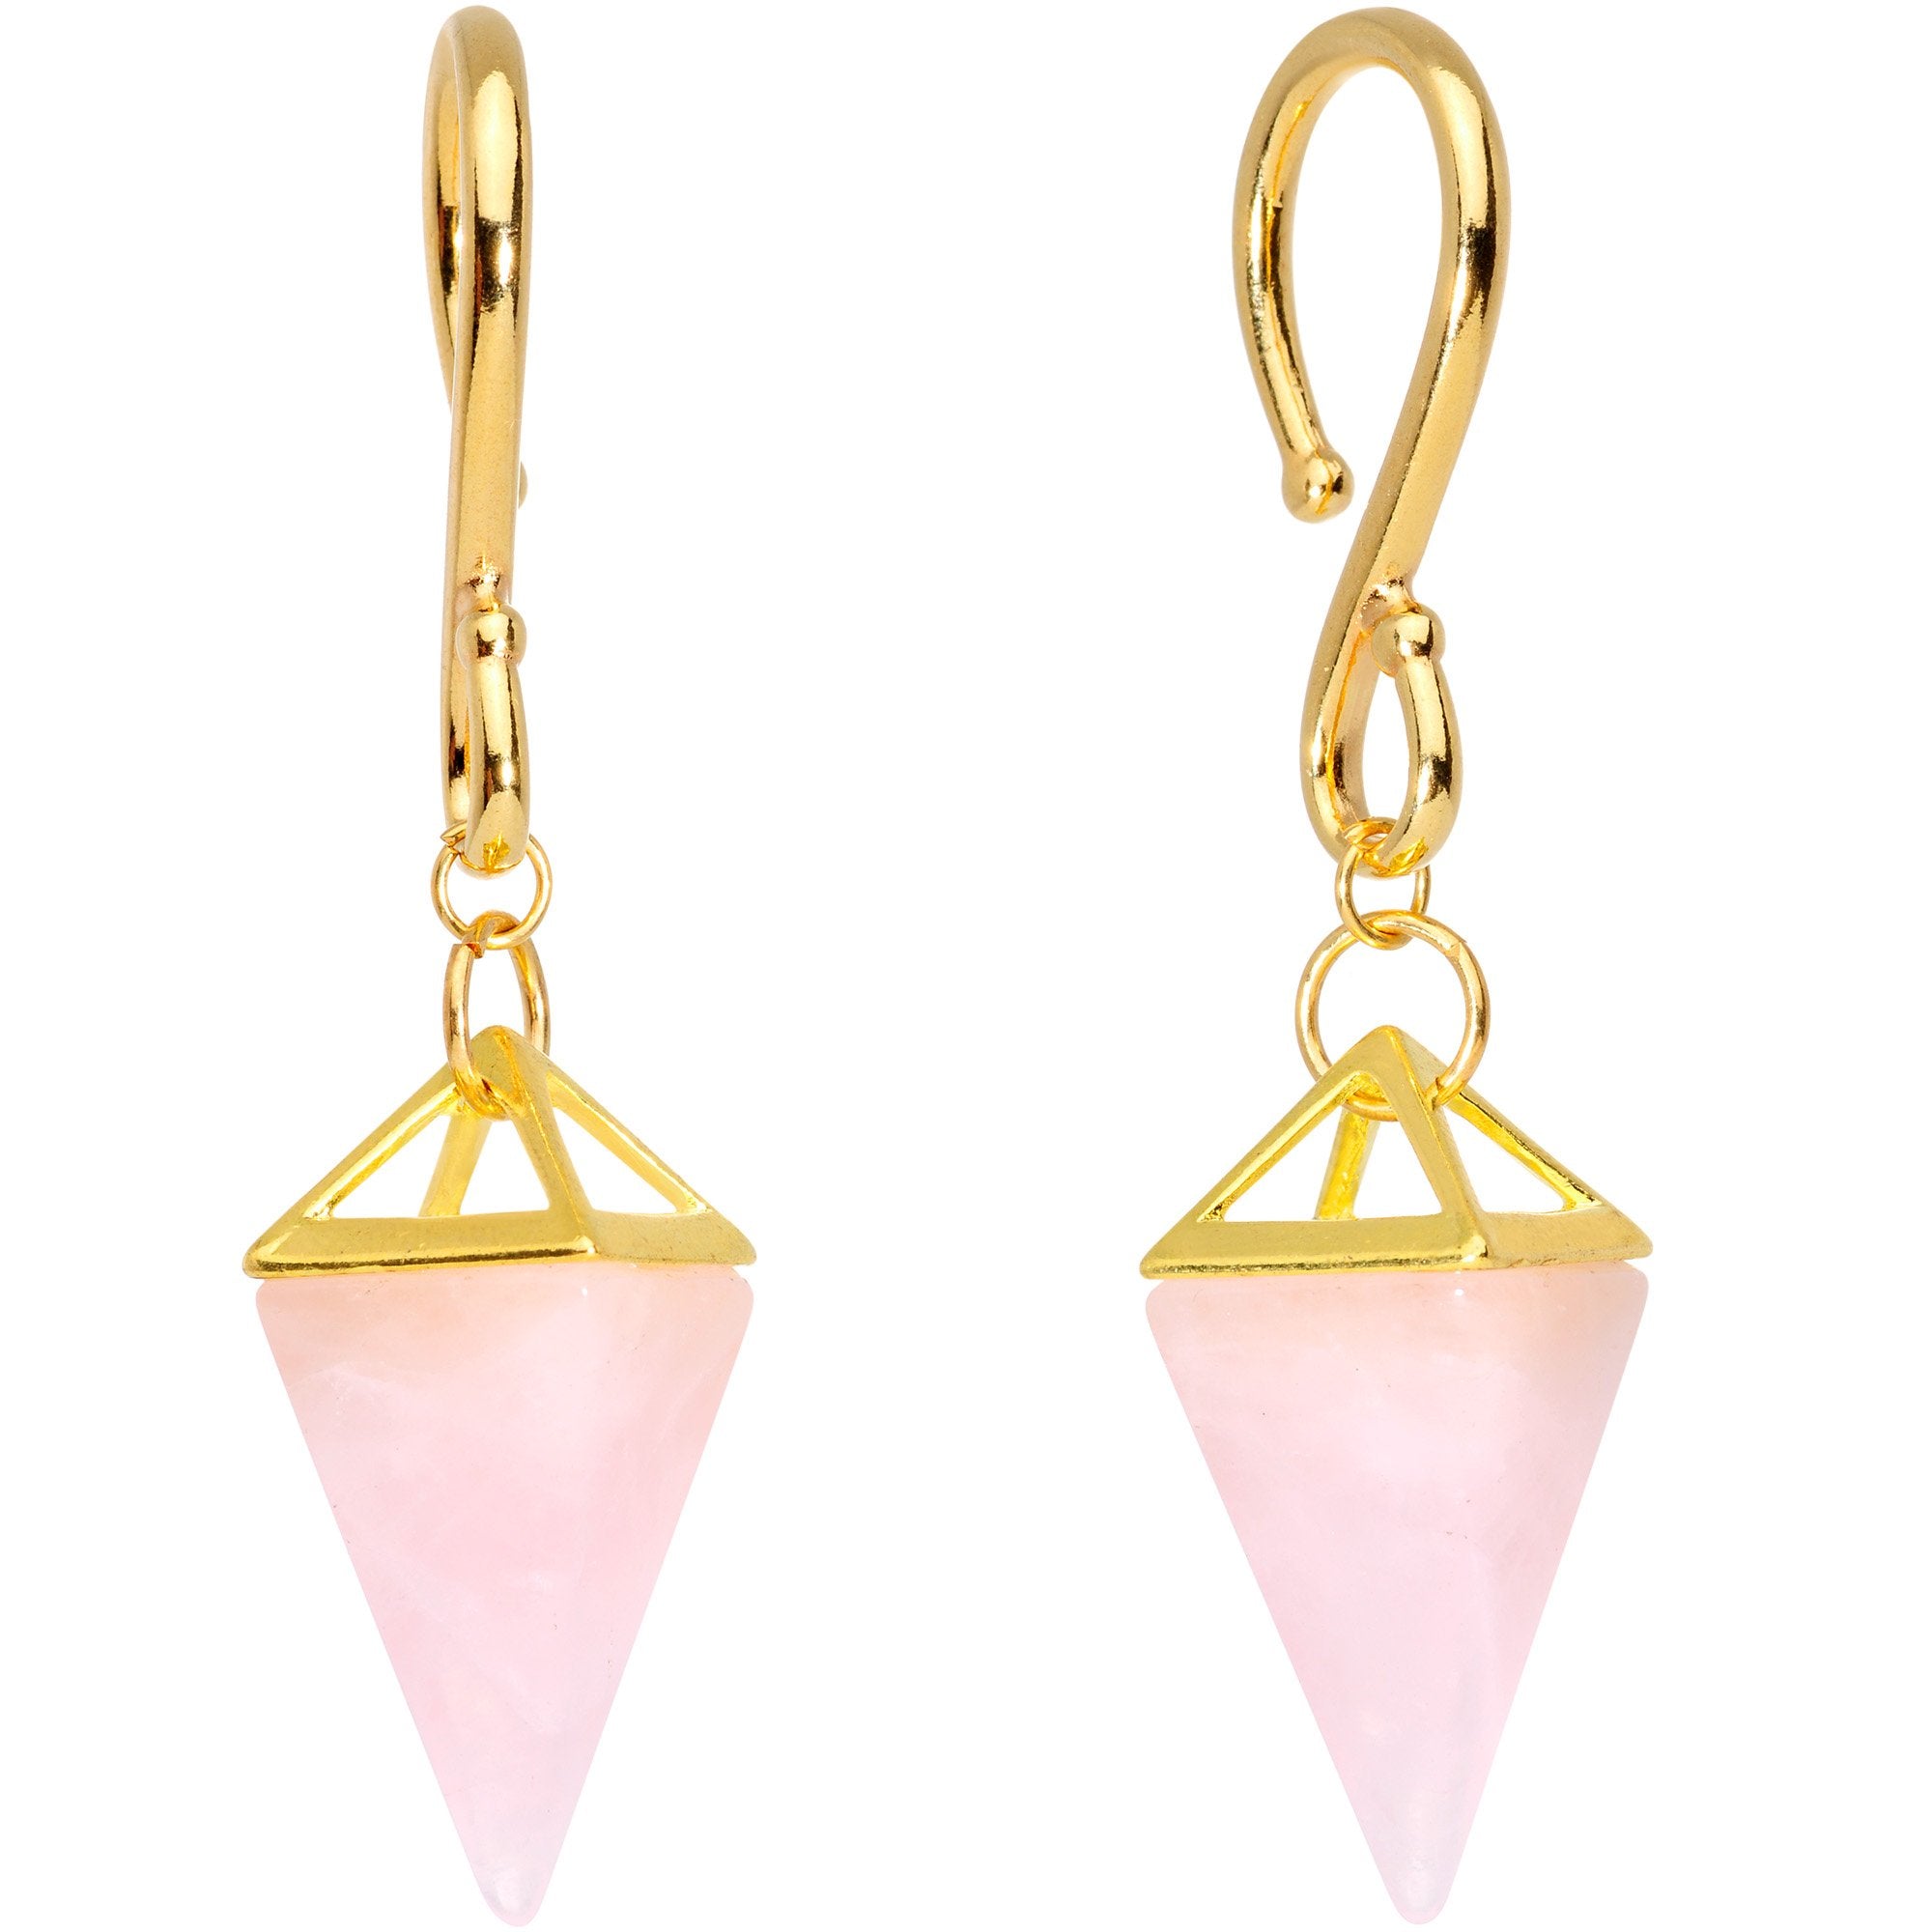 Handcrafted Gold Plated Rose Flower Quartz Stone Pyramid Ear Weights